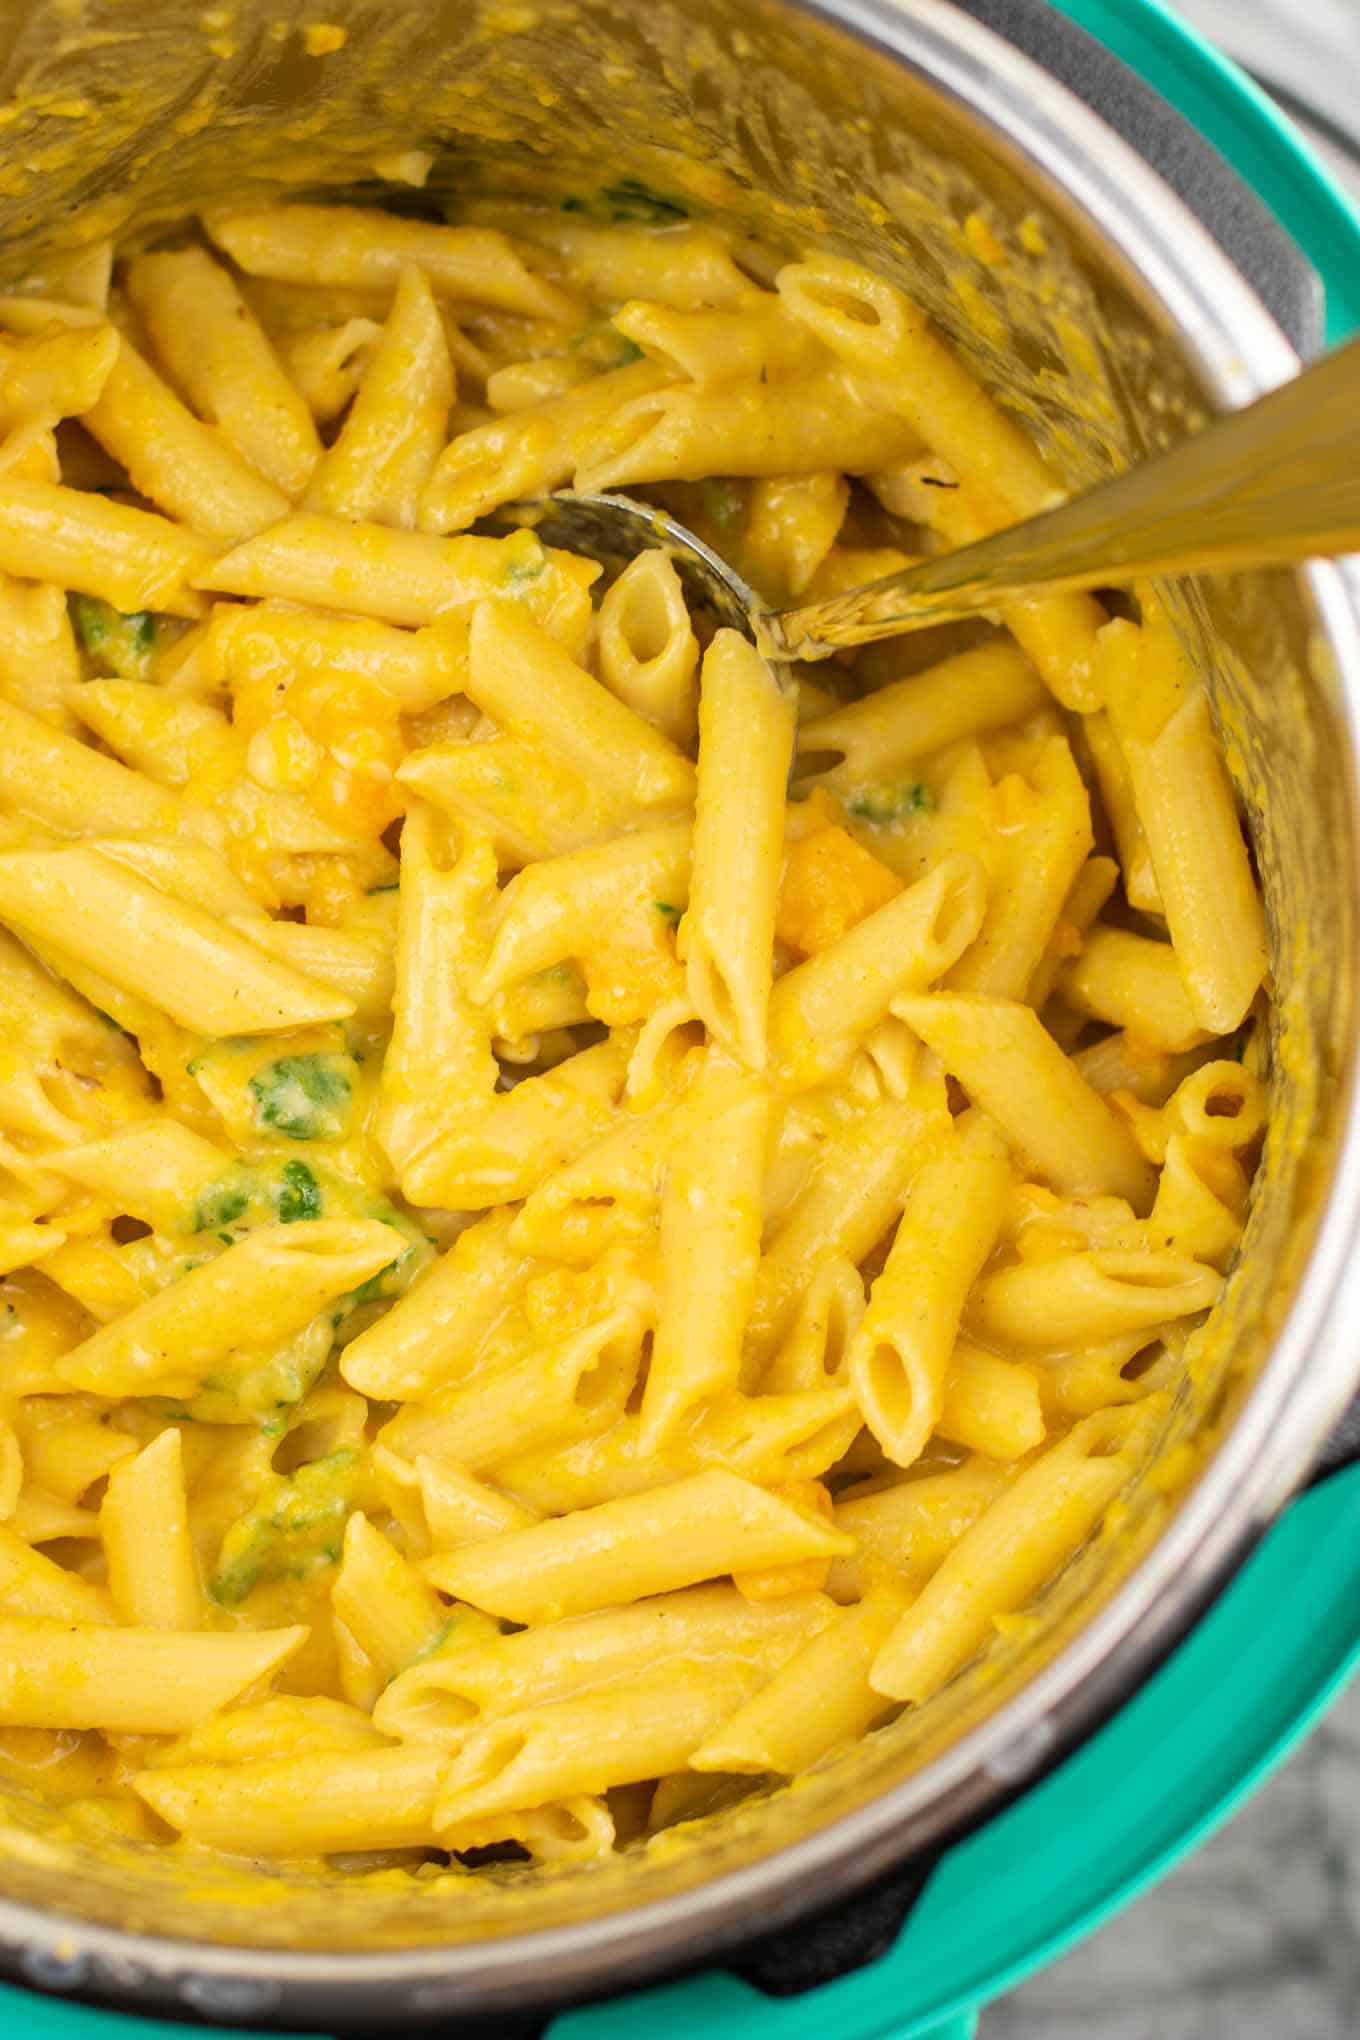 Instant Pot Creamy Sweet Potato Pasta (vegetarian) – this is the perfect fall recipe and tastes AMAZING! Even my two year old loved it, and it was a great way to sneak in more veggies! Definitely will be making this one again. #instantpot #instantpotrecipe #instantpotvegetarian #vegetarian #easydinner #dinner #vegetariandinner #sweetpotatorecipe #fallrecipe